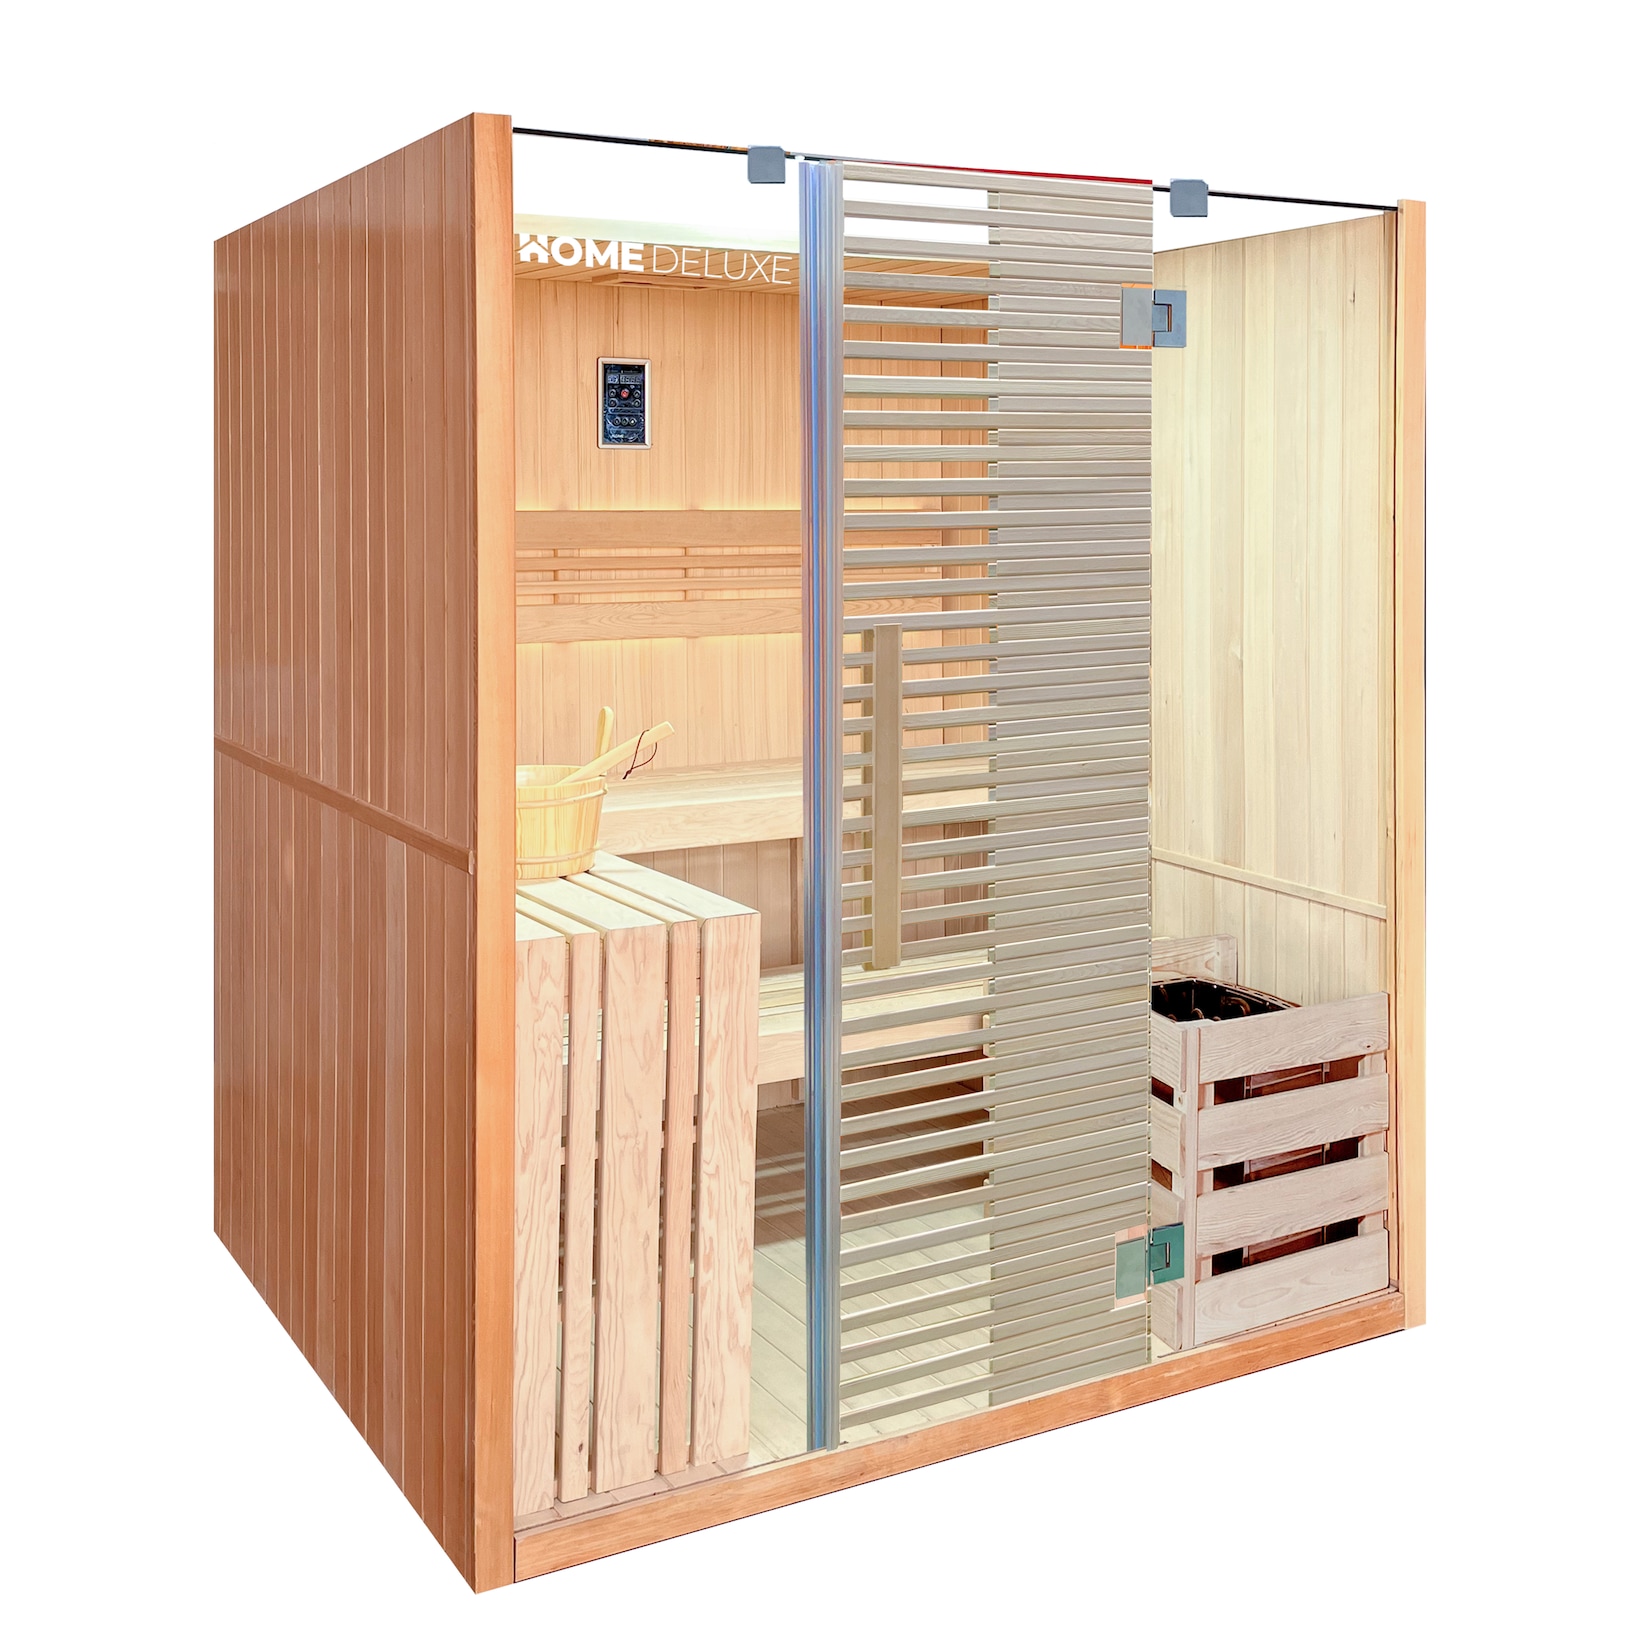 Home Deluxe Traditionelle Sauna OMAHA